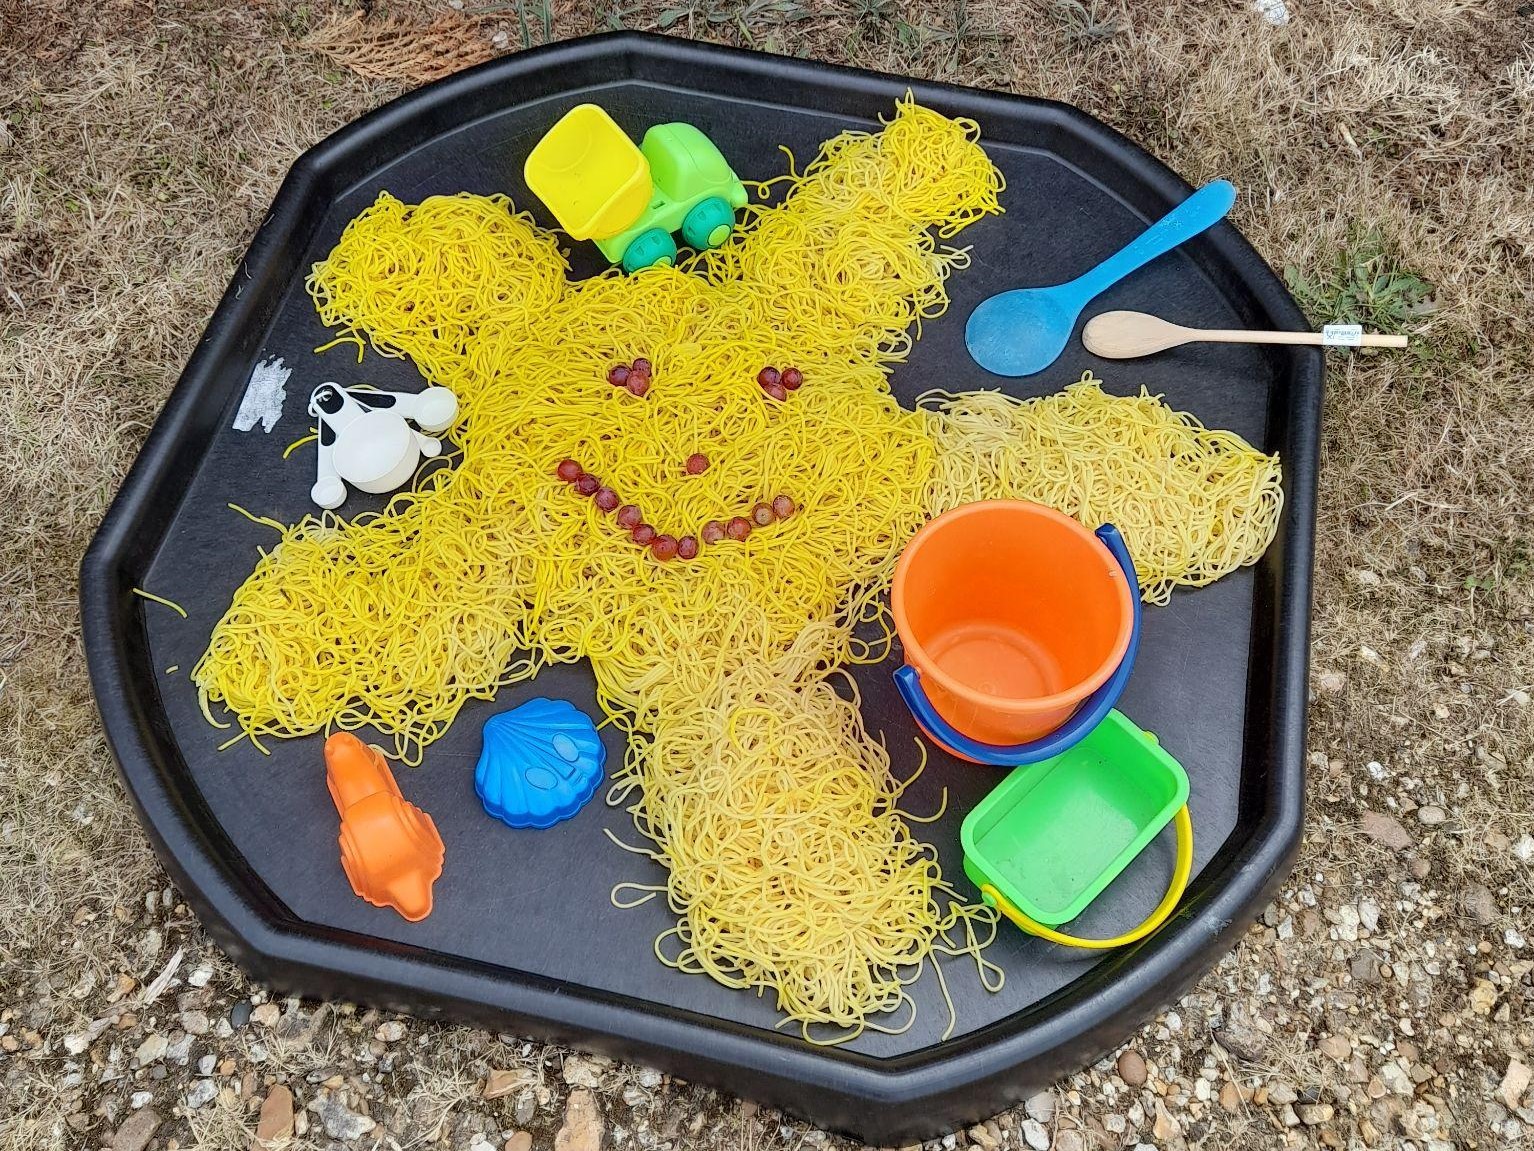 Fun in the sun - craft and messy play afternoons